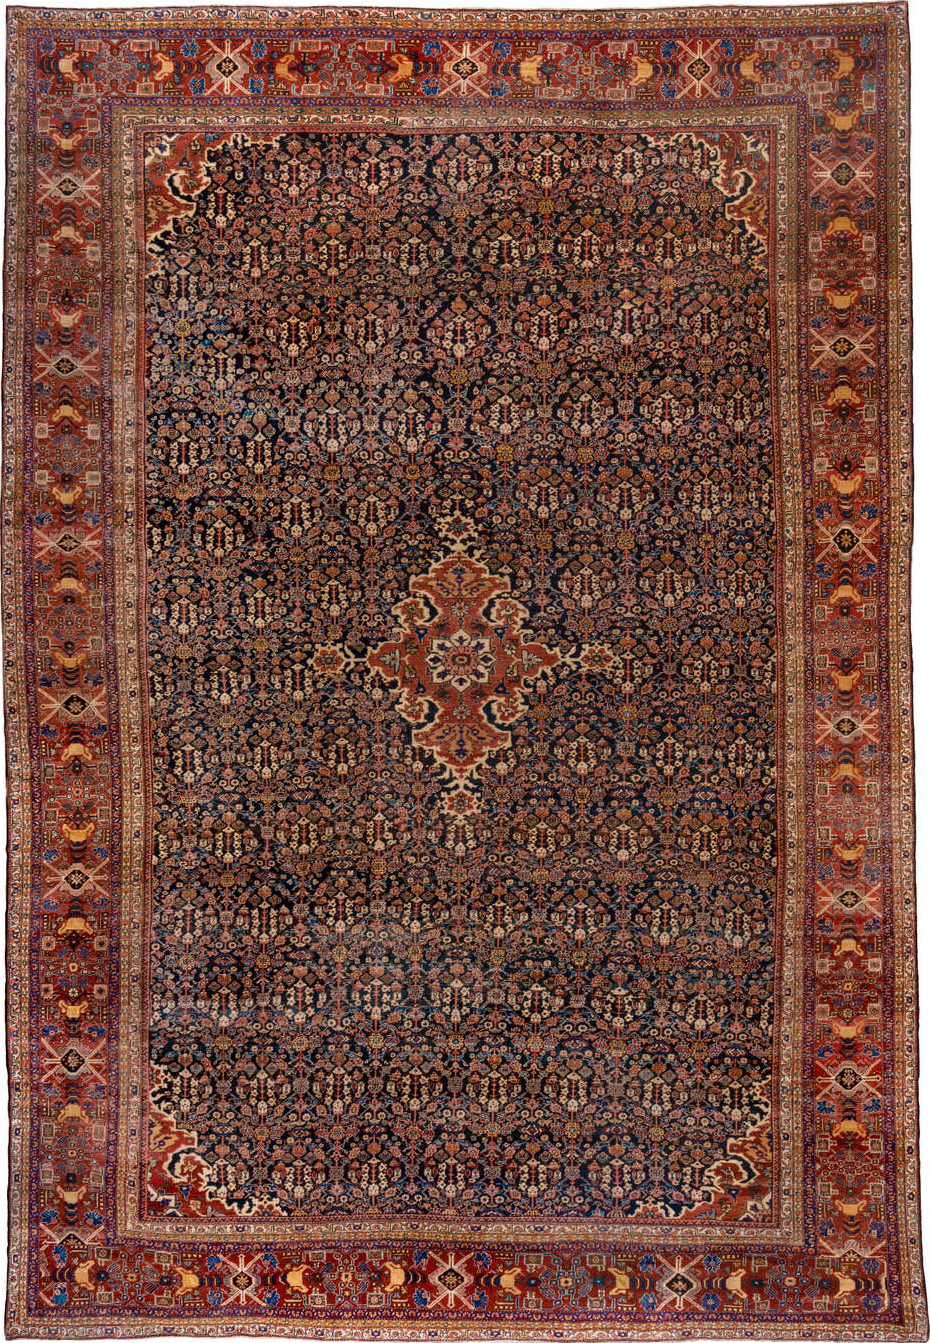 Sale Rugs  One of a Kind Antique & Vintage Sale Rugs – Rug Styling